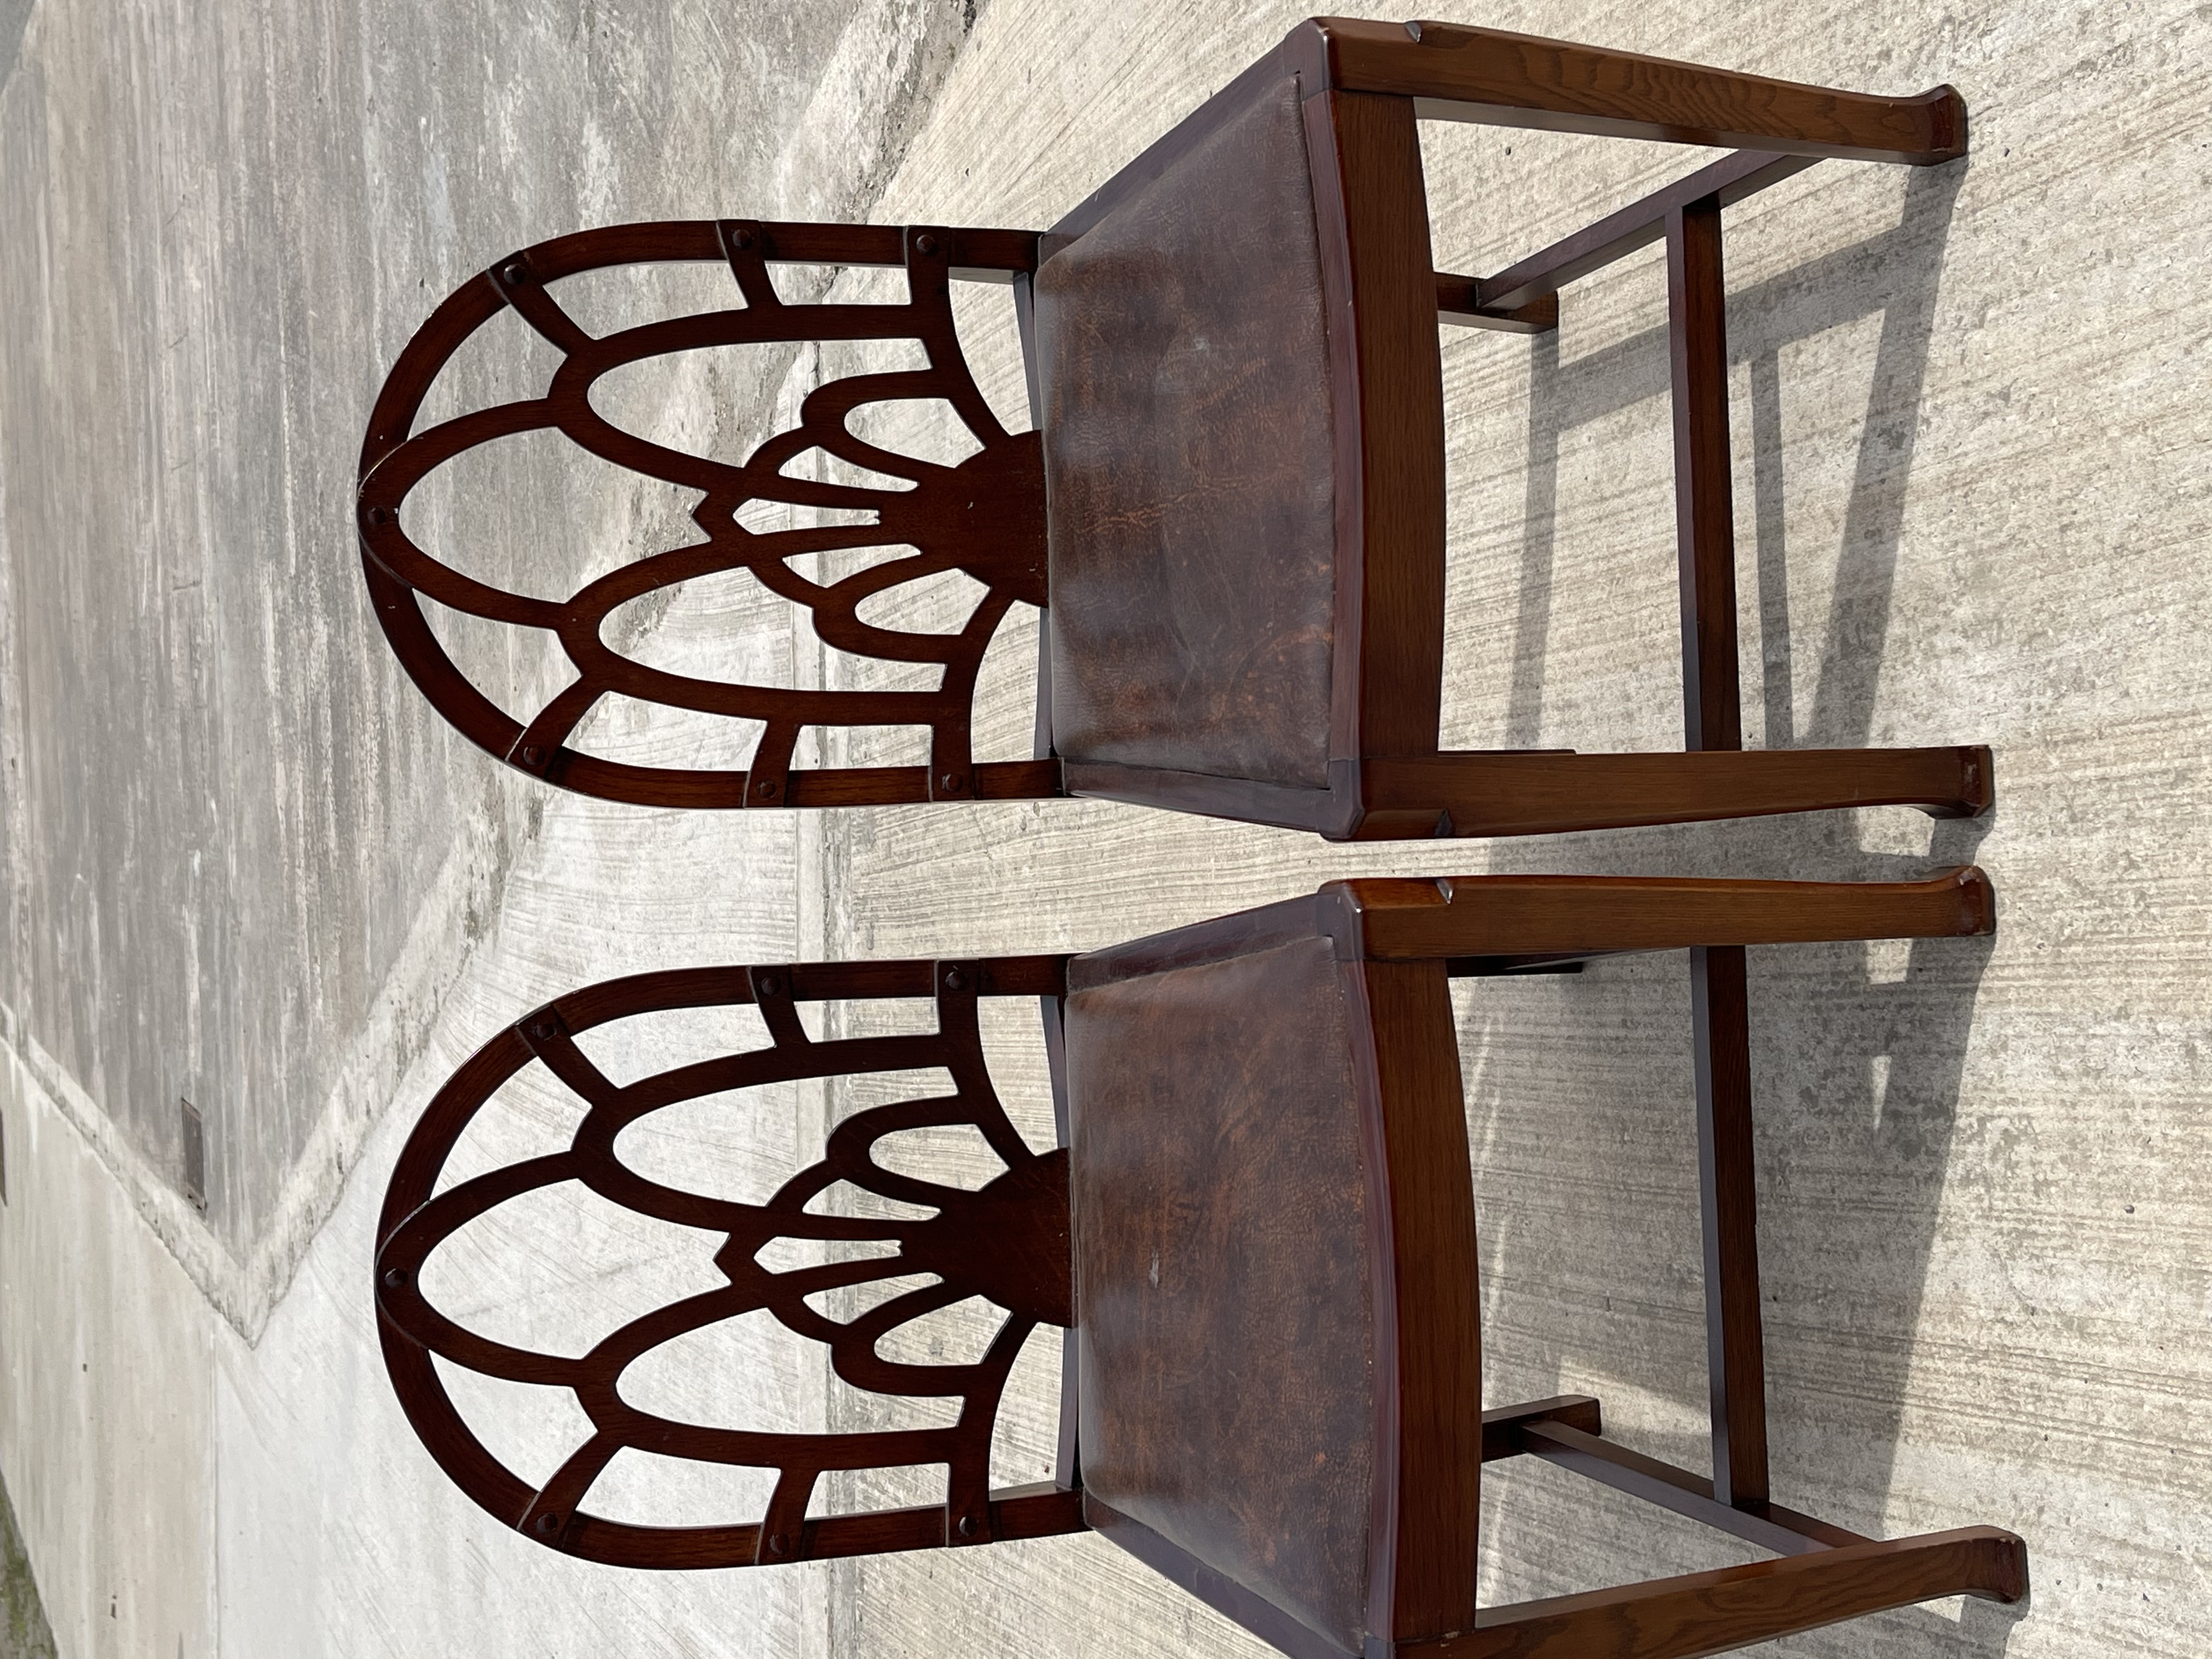 Pair of Vintage Gothic Chairs - Image 3 of 5